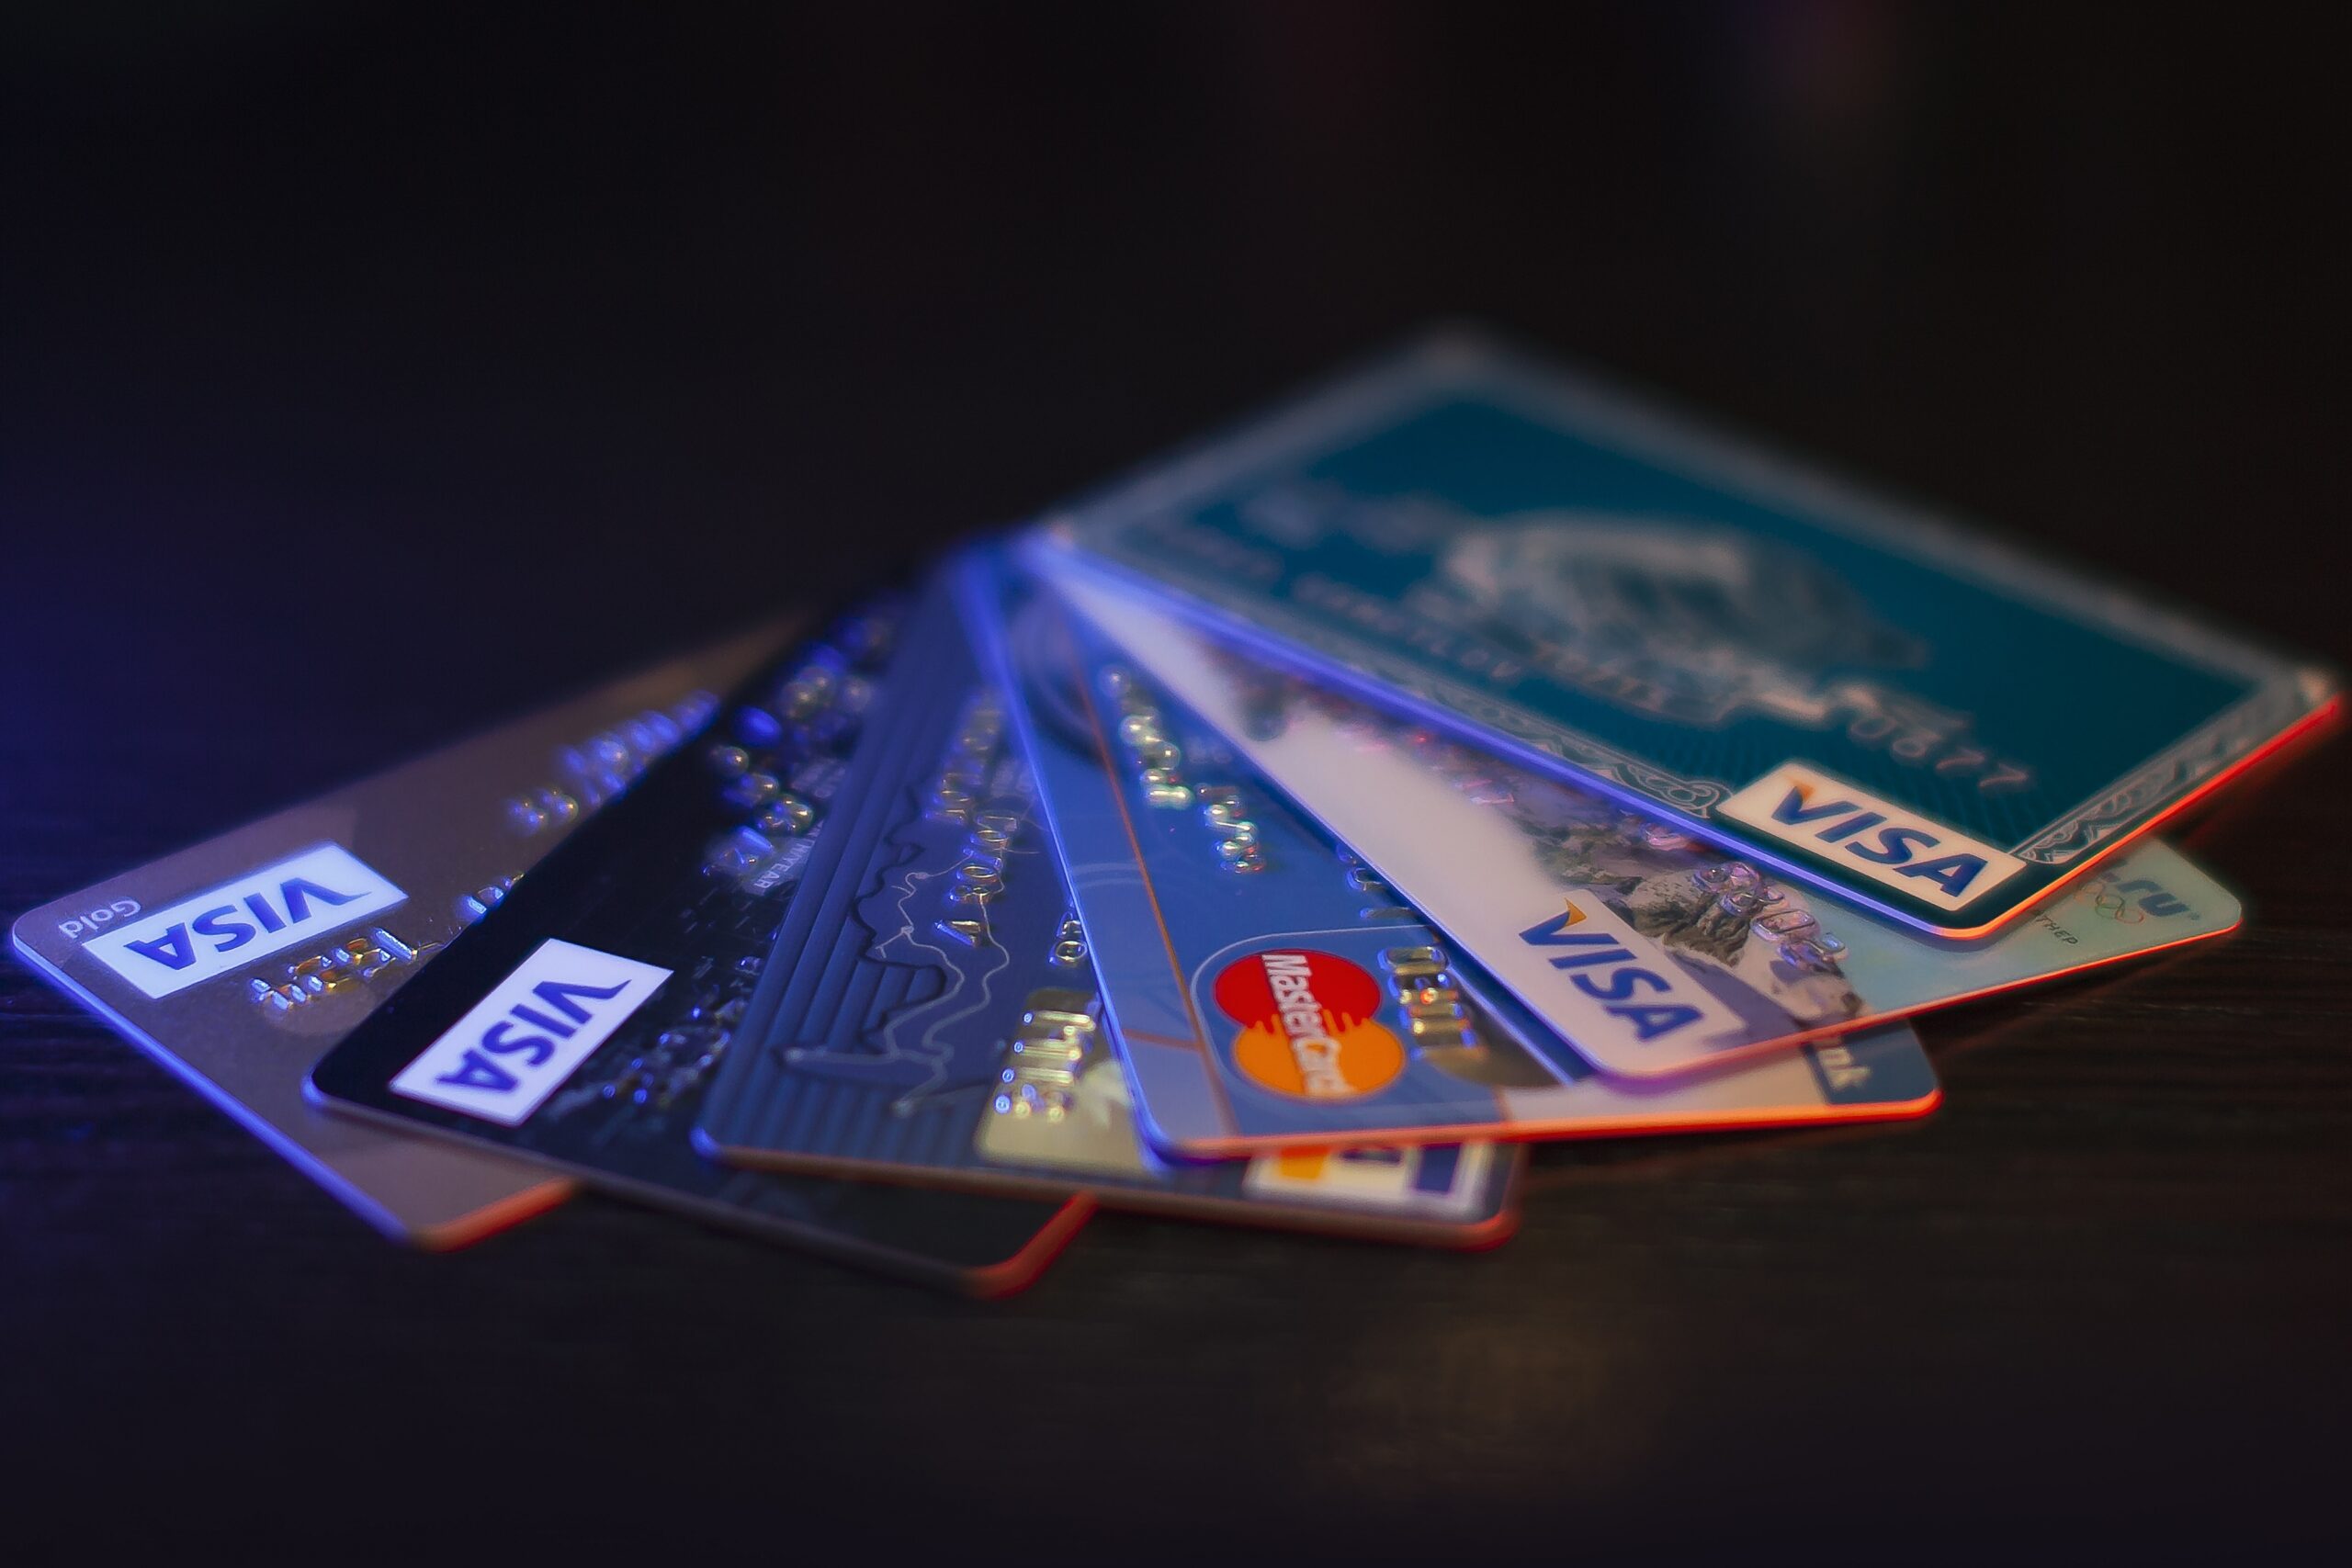 An assortment of credit cards.